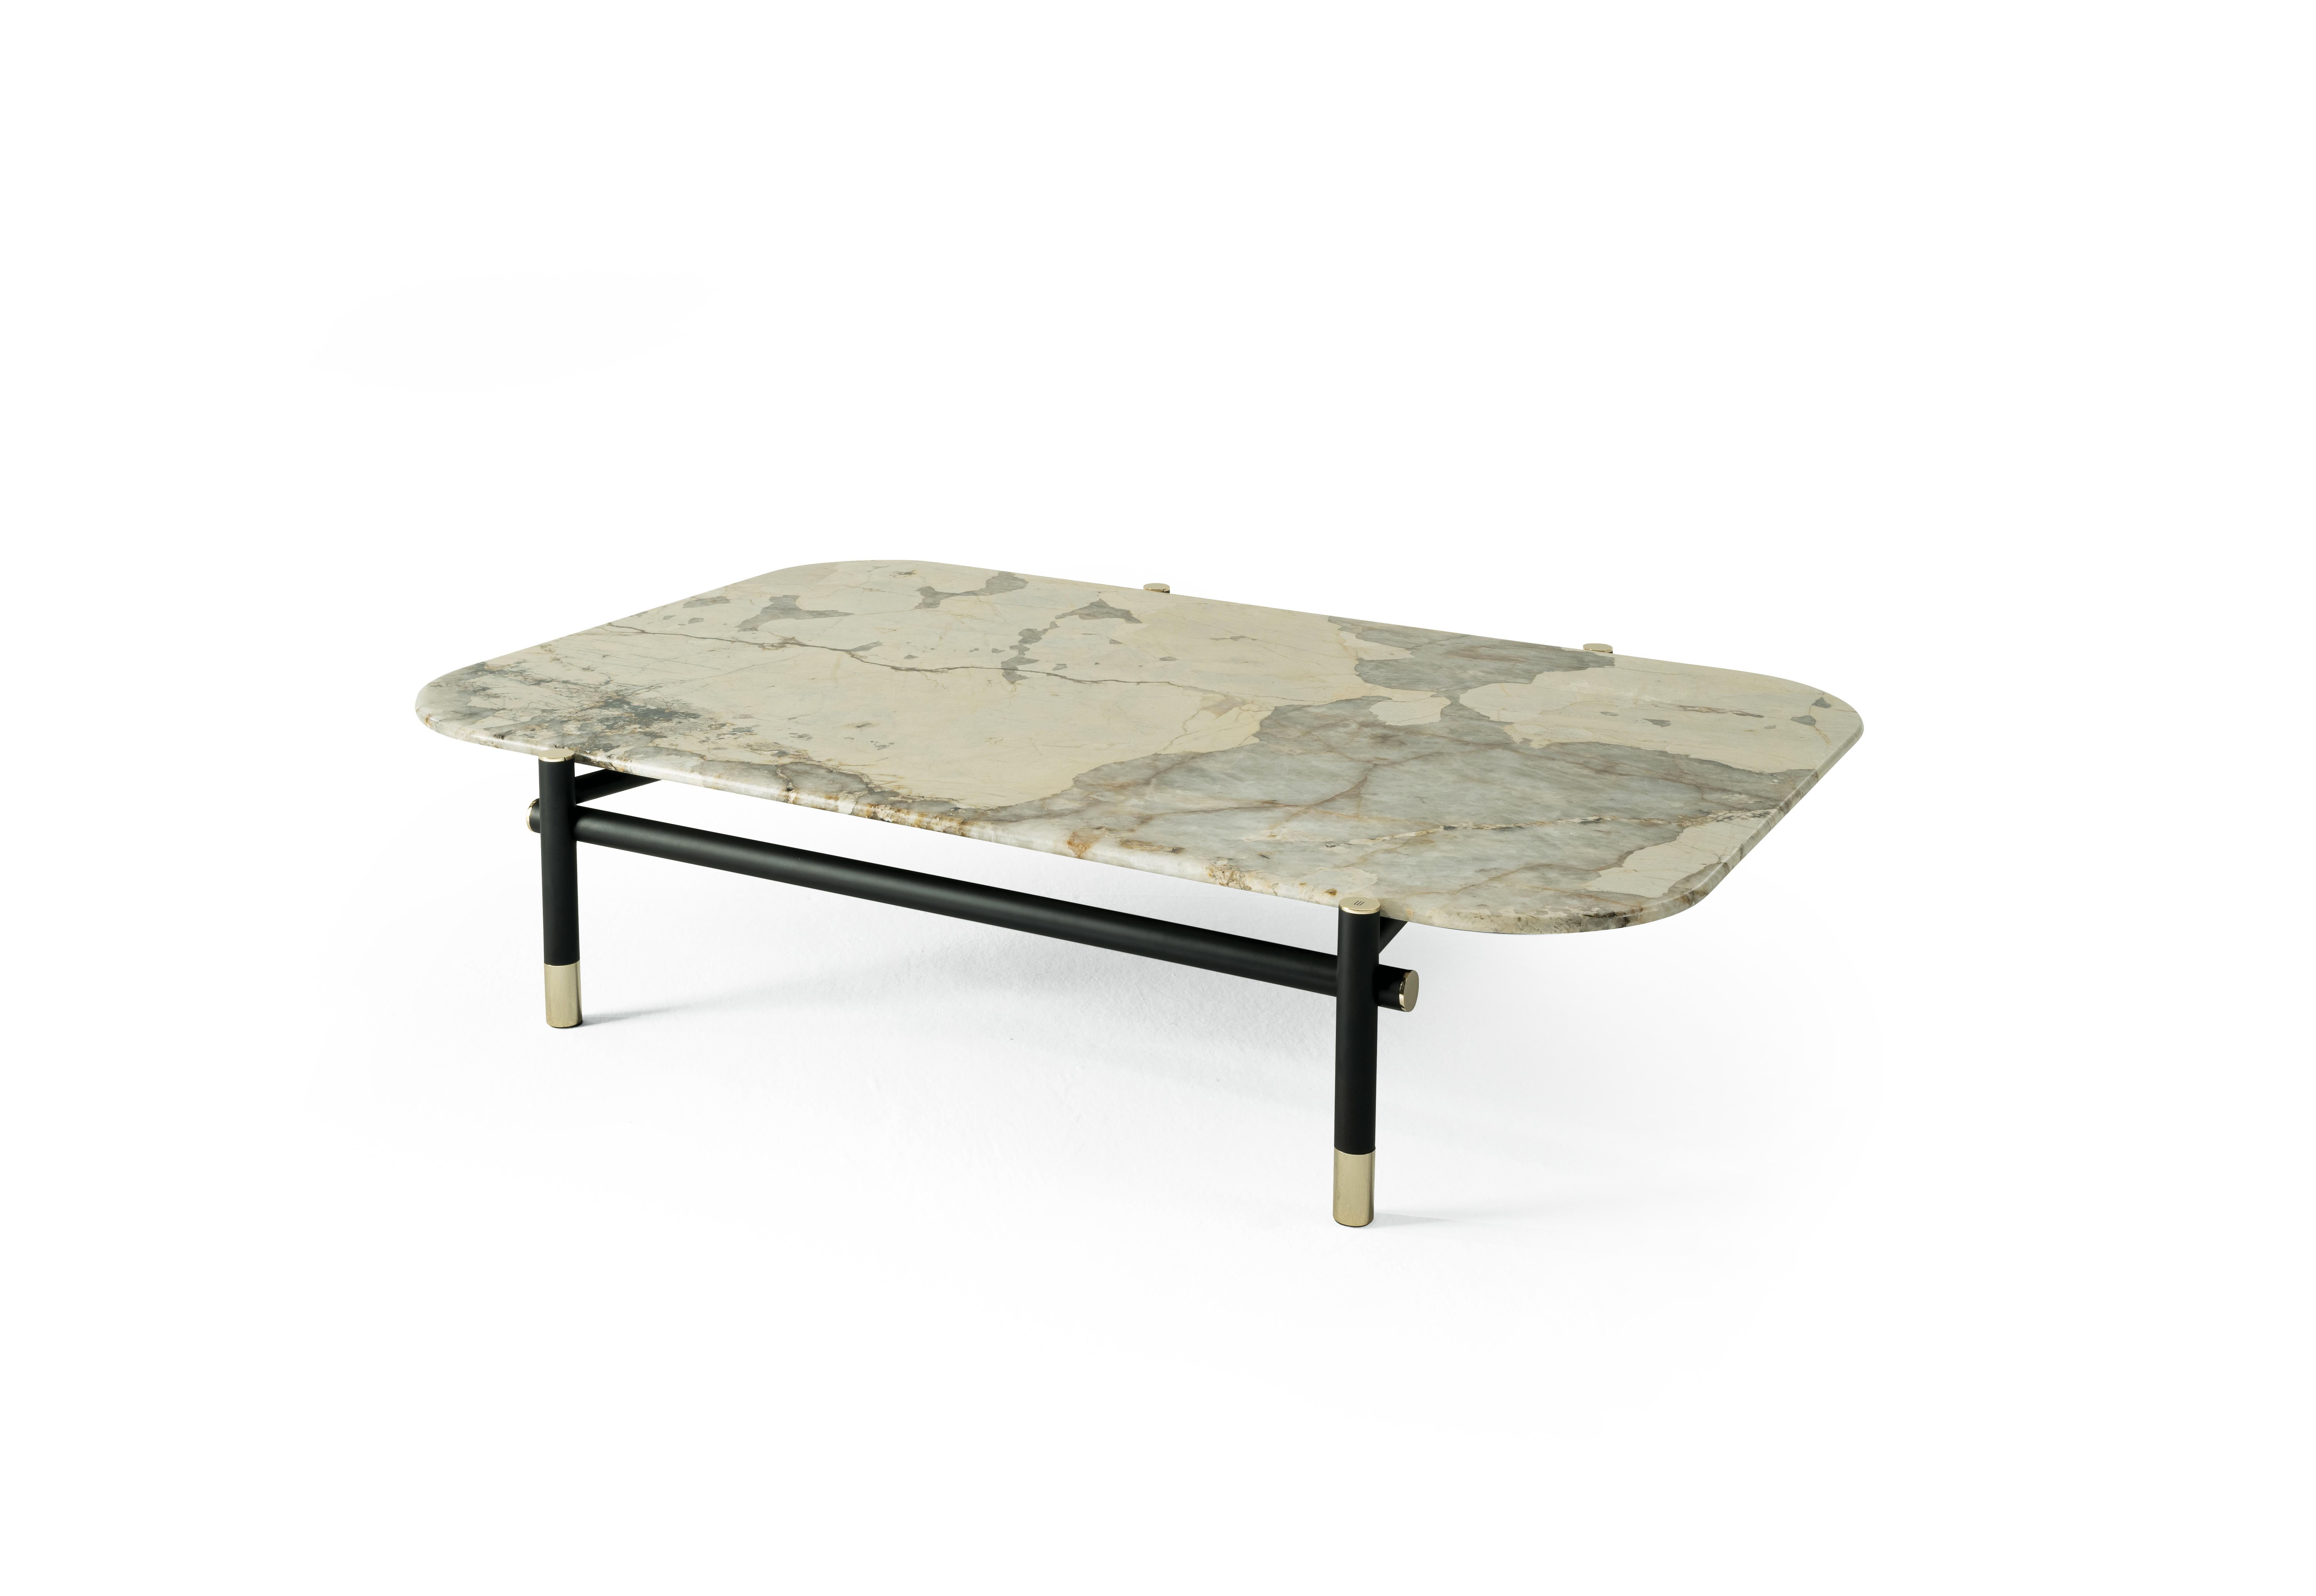 A central table with a precious appeal, Woodstock features a special top in marble enhanced by refined details such as the brass tips of the base. The table is a perfect expression of the extraordinary craftmanship that characterizes the entire